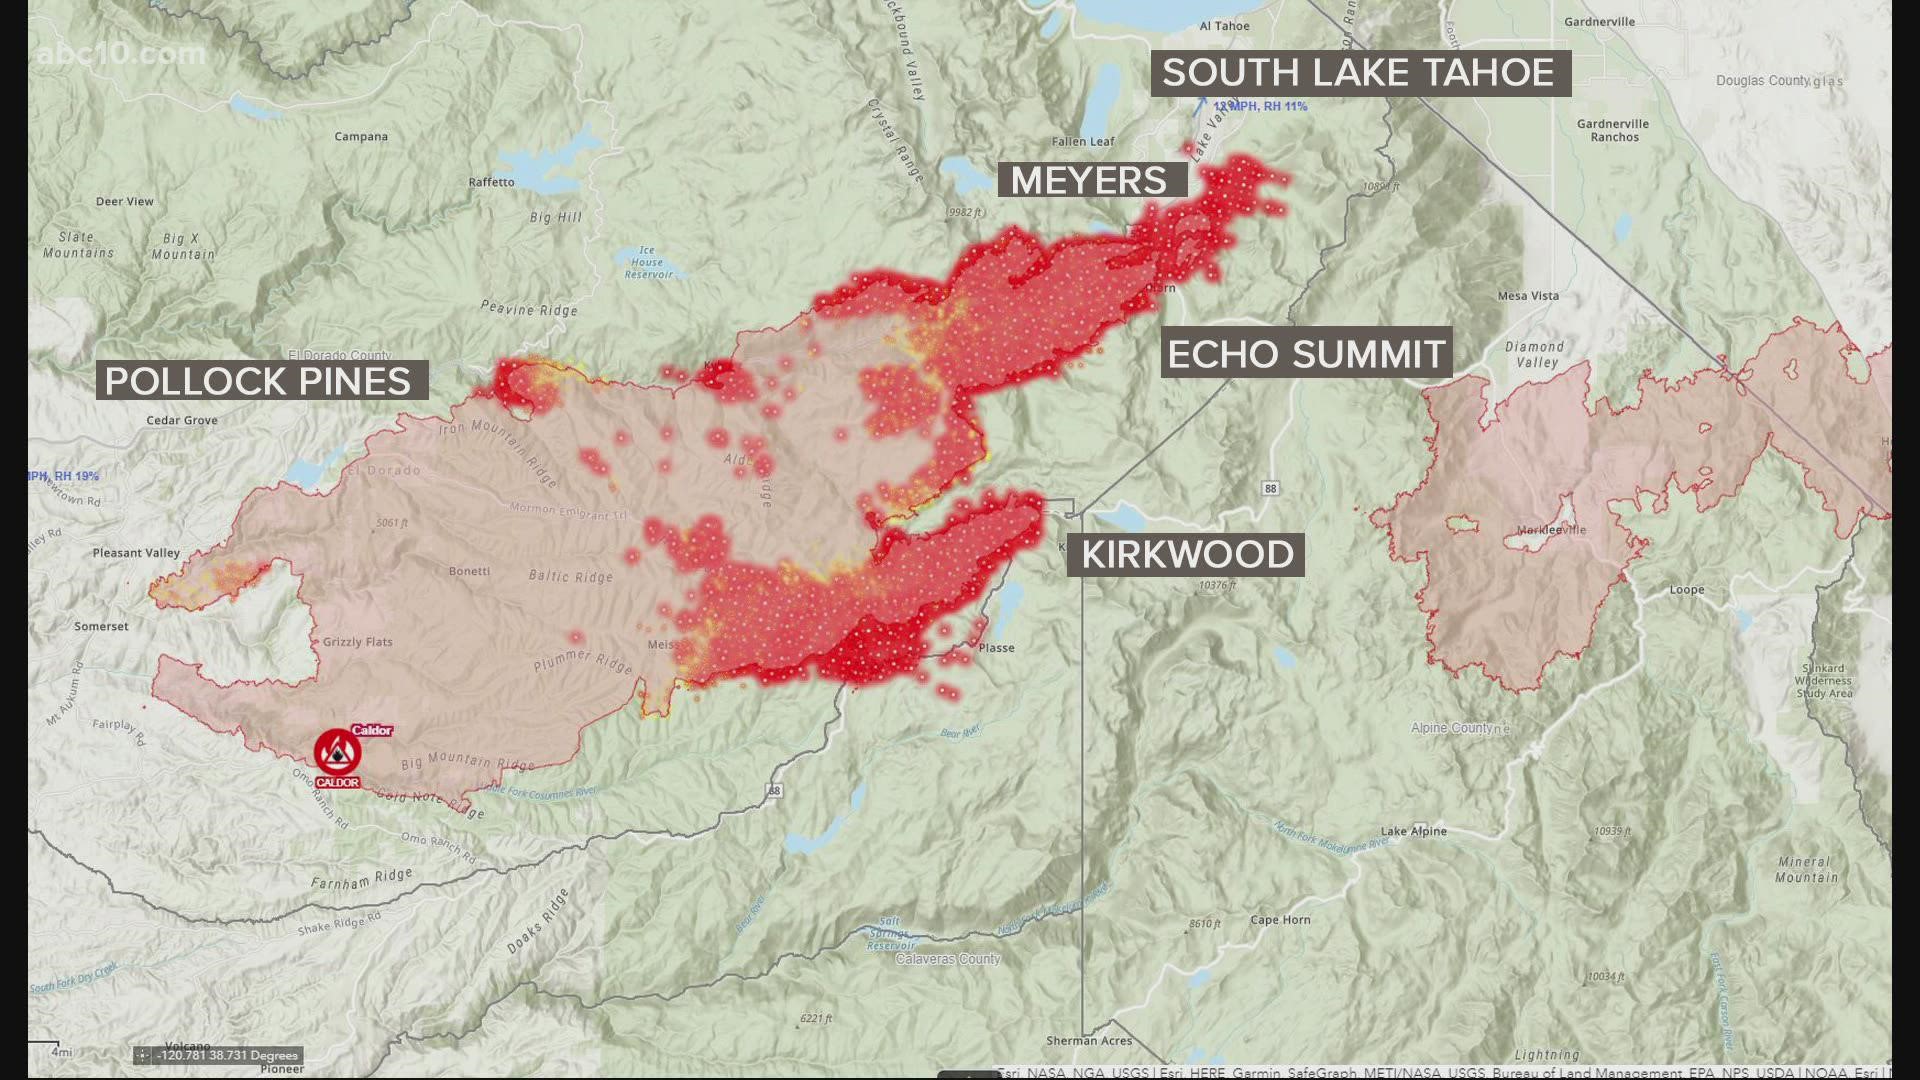 Update at 5 p.m. Some of the El Dorado County evacuations have been downgraded from orders to warnings, but this fight is far from over in other areas.